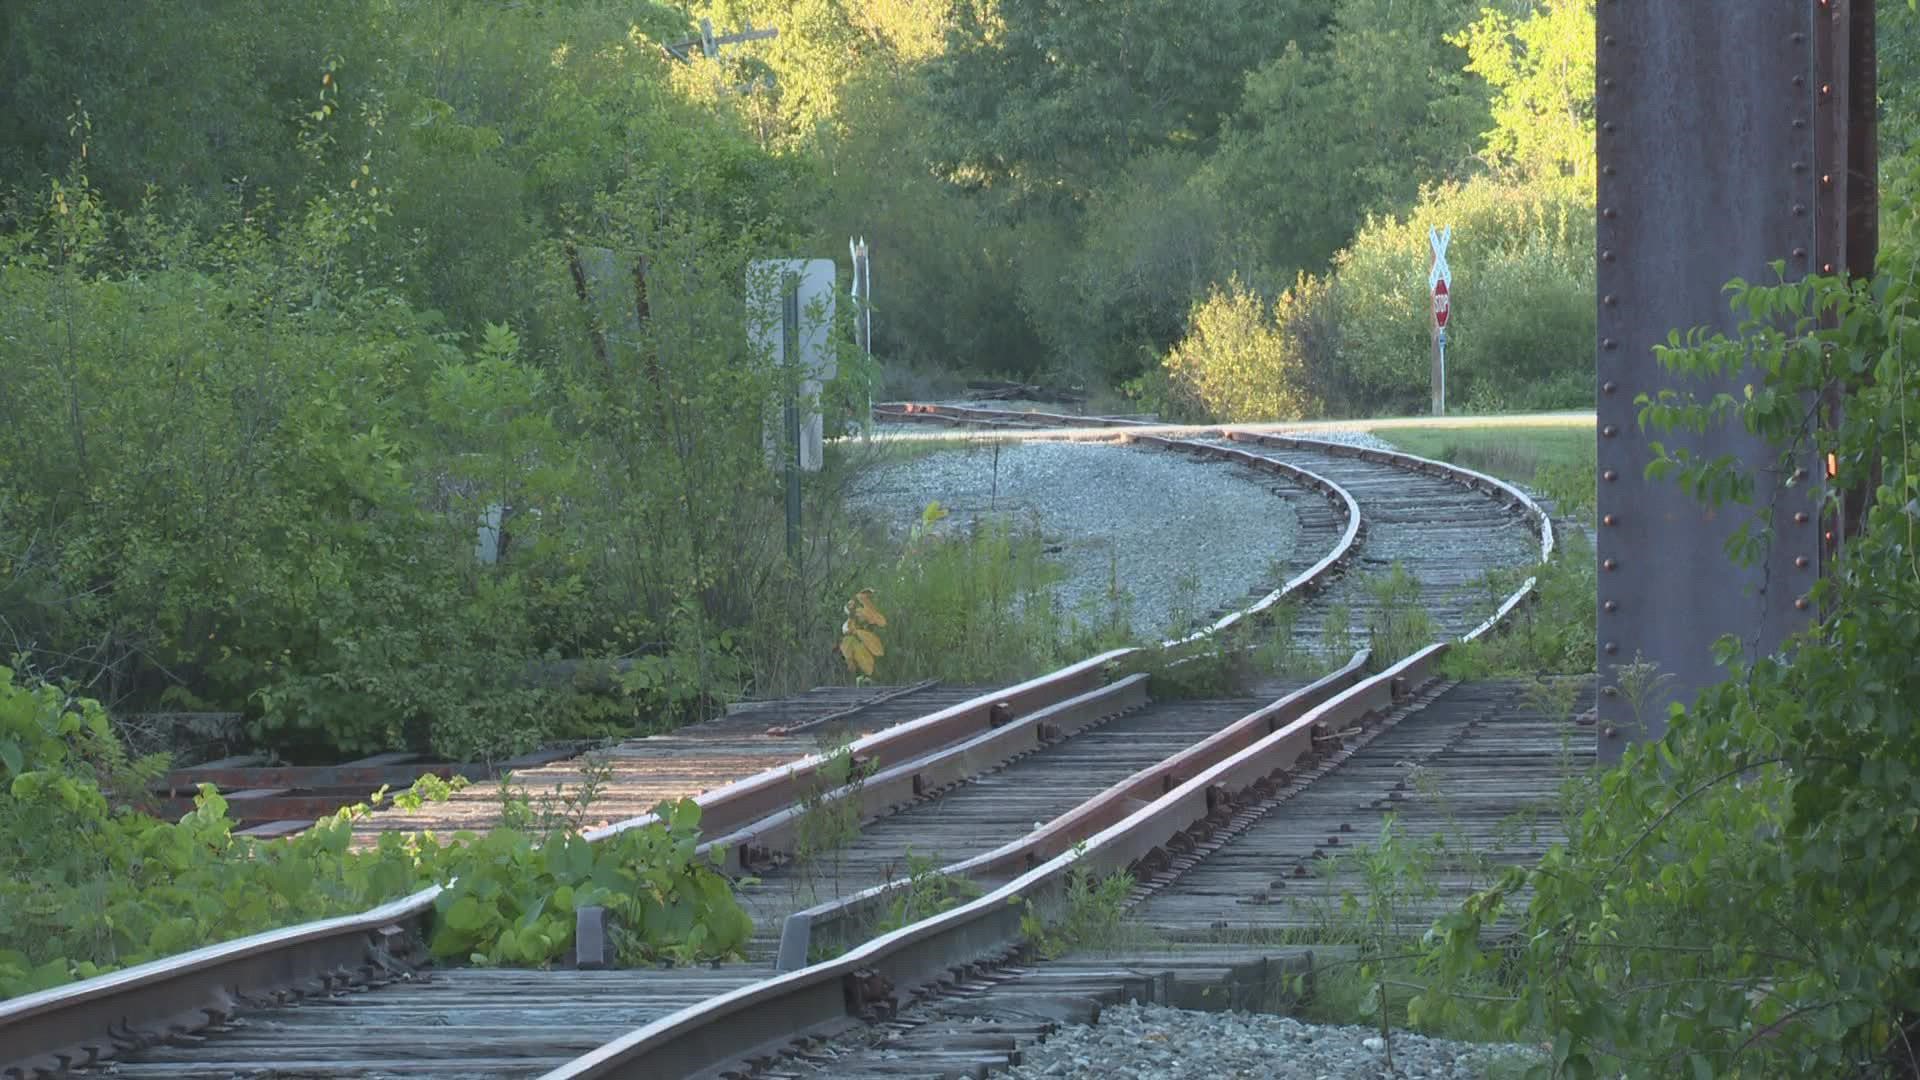 The proposed 26-mile rail trail would convert the St. Lawrence & Atlantic rail line to a trail from Portland to Auburn